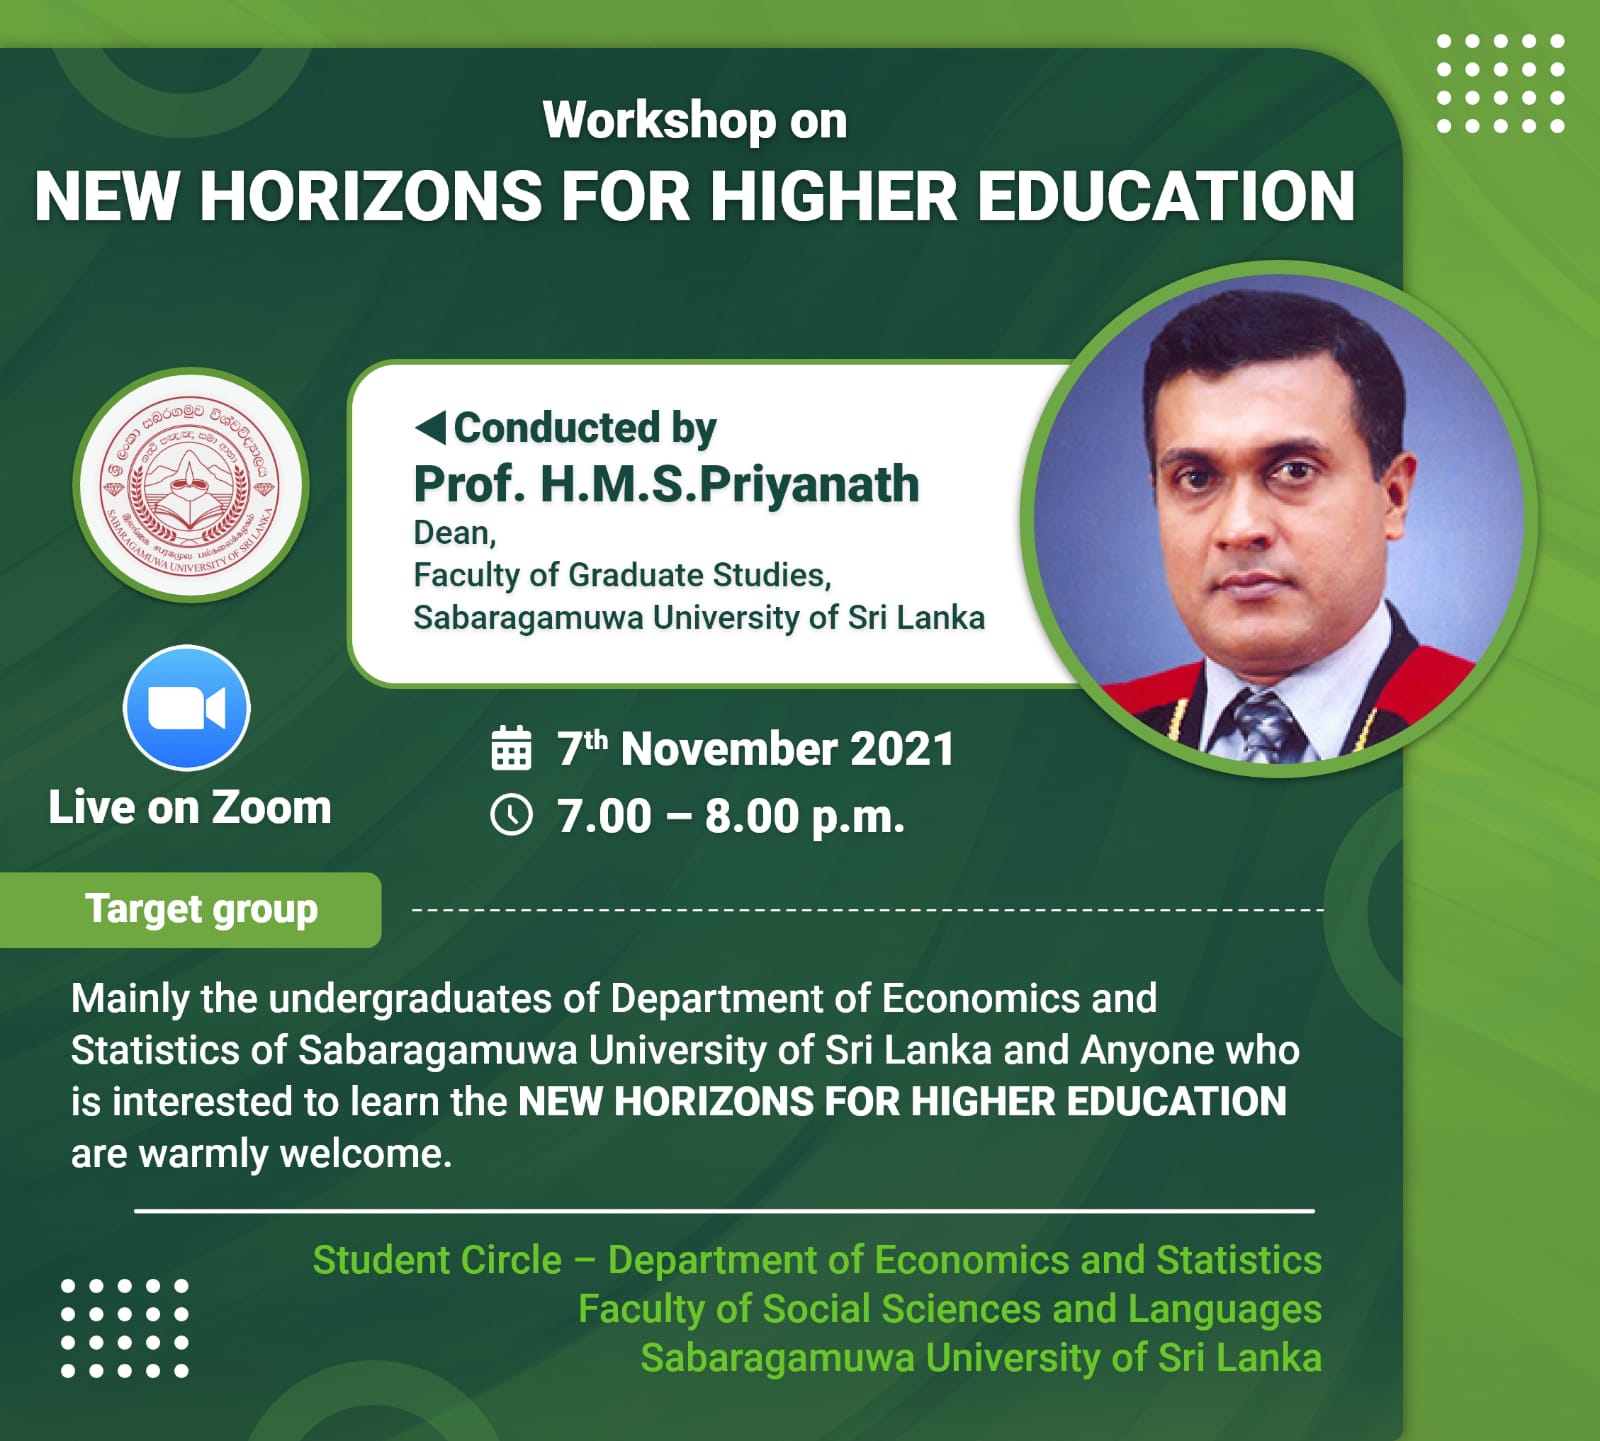 Workshop on New horizons for higher education